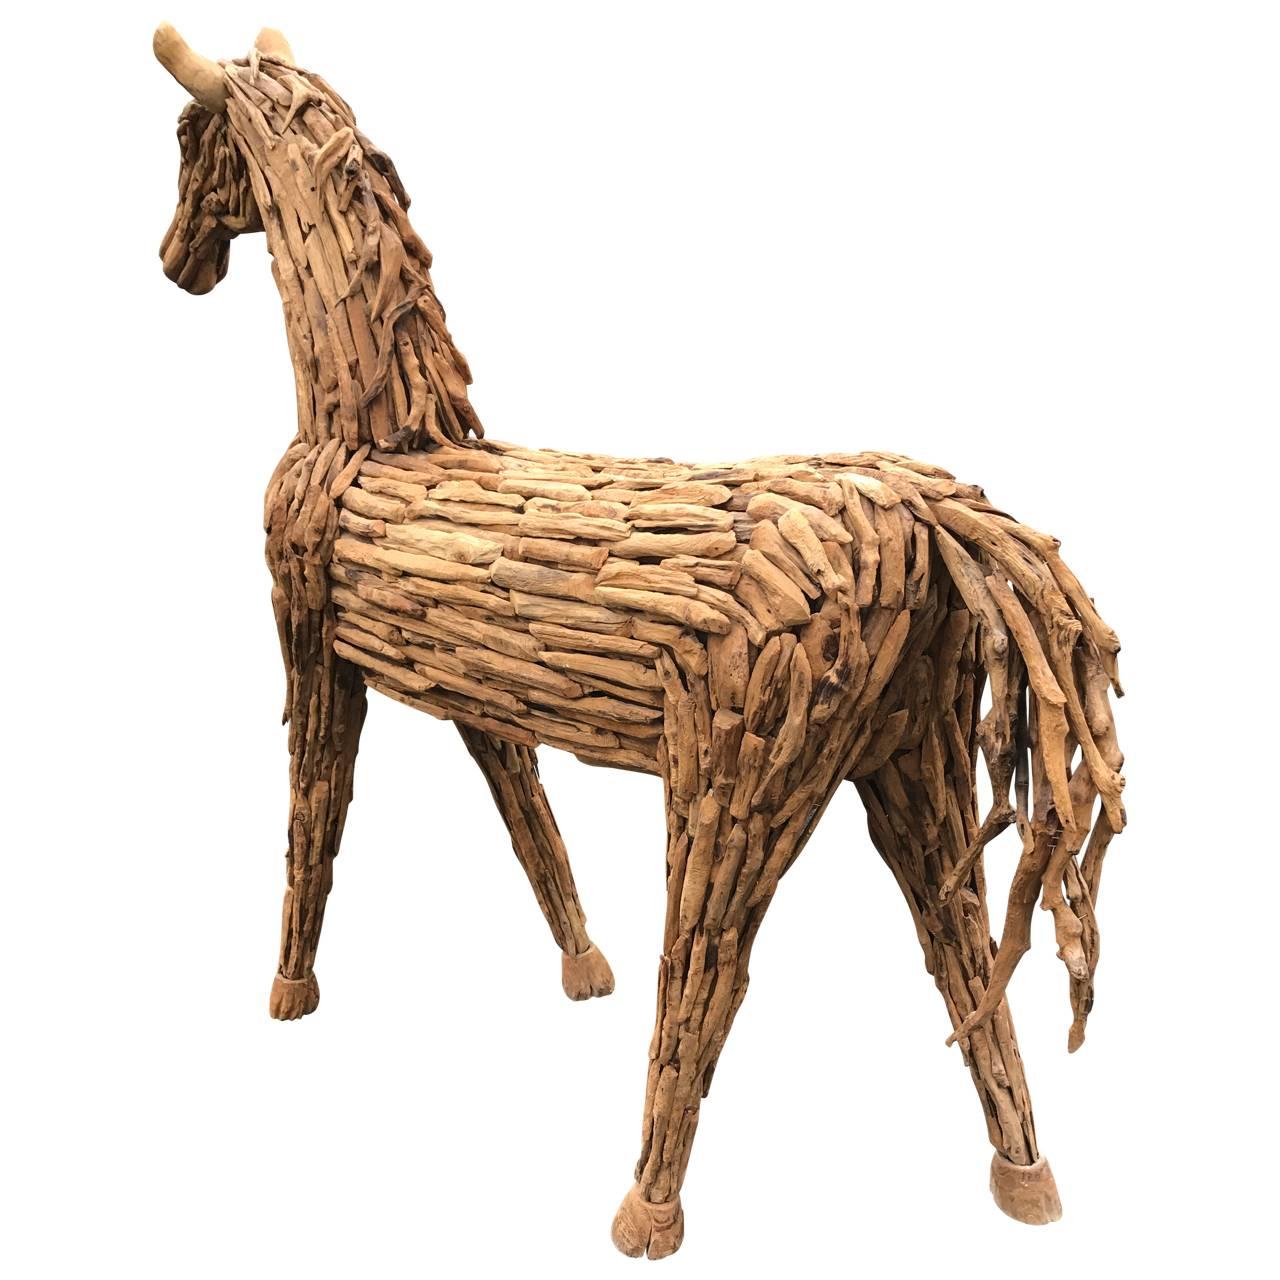 Lifesize Reclaimed Wood Equine Sculpture 2